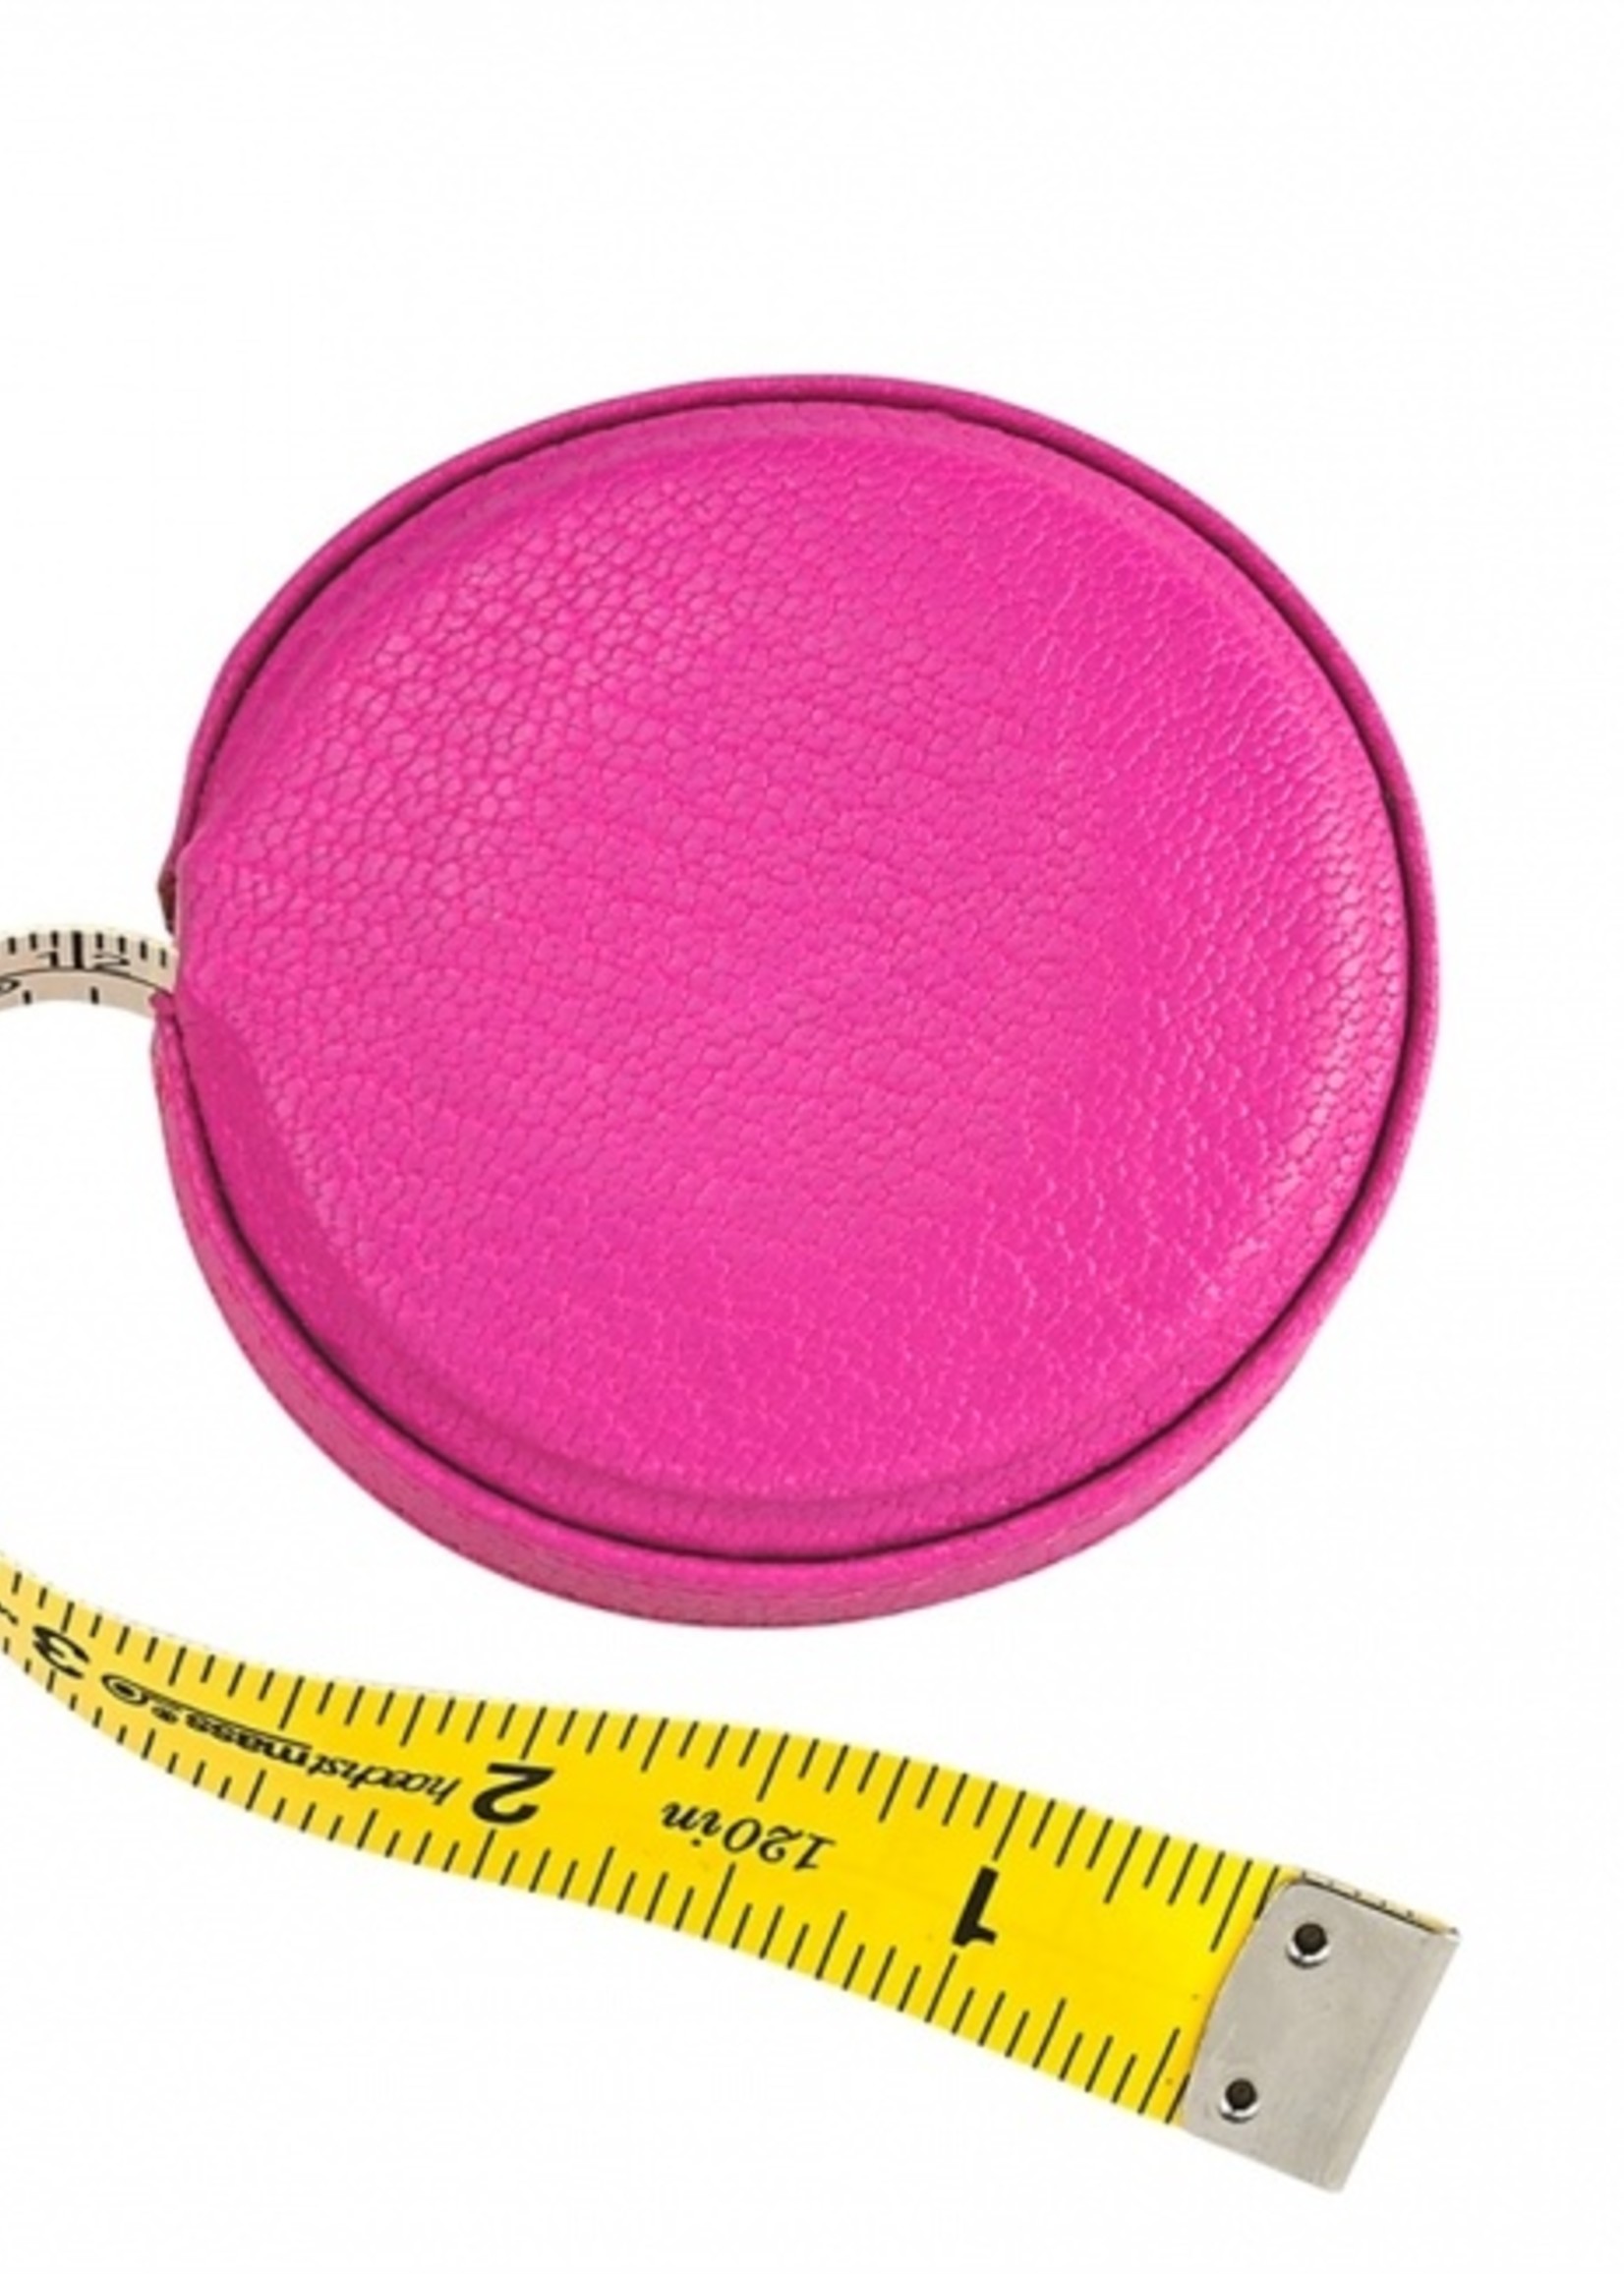 Graphic Image Inc. Large Tape Measure - Pink